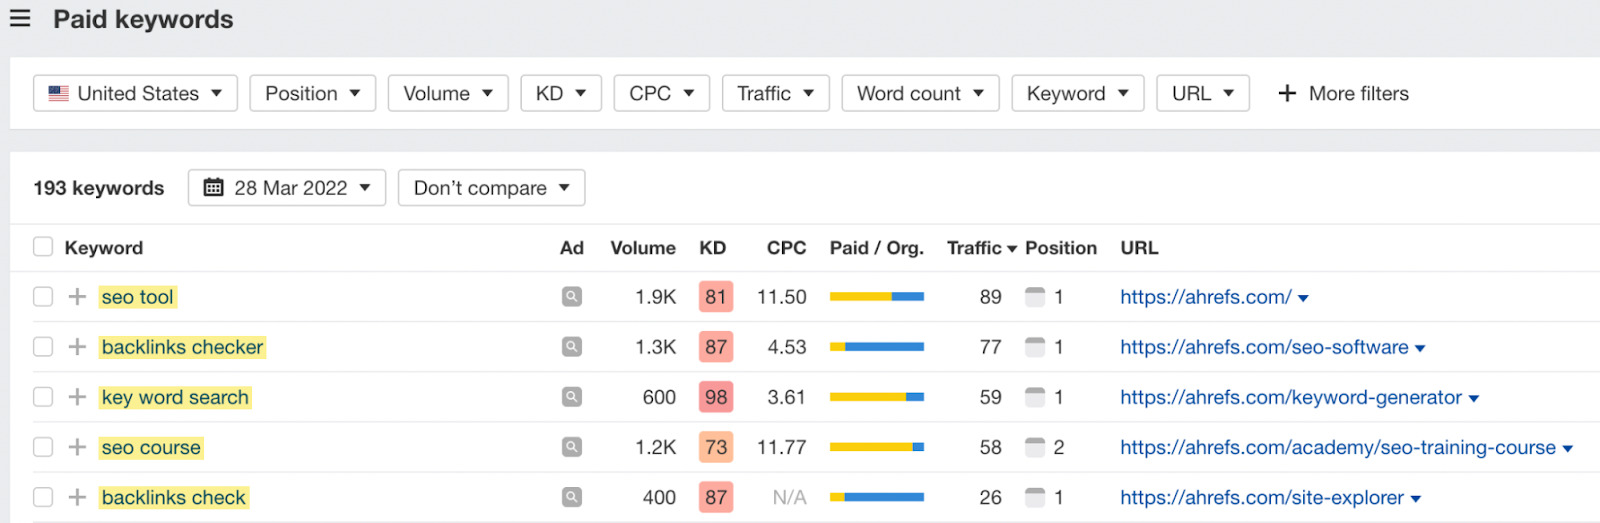 Paid keywords report results 